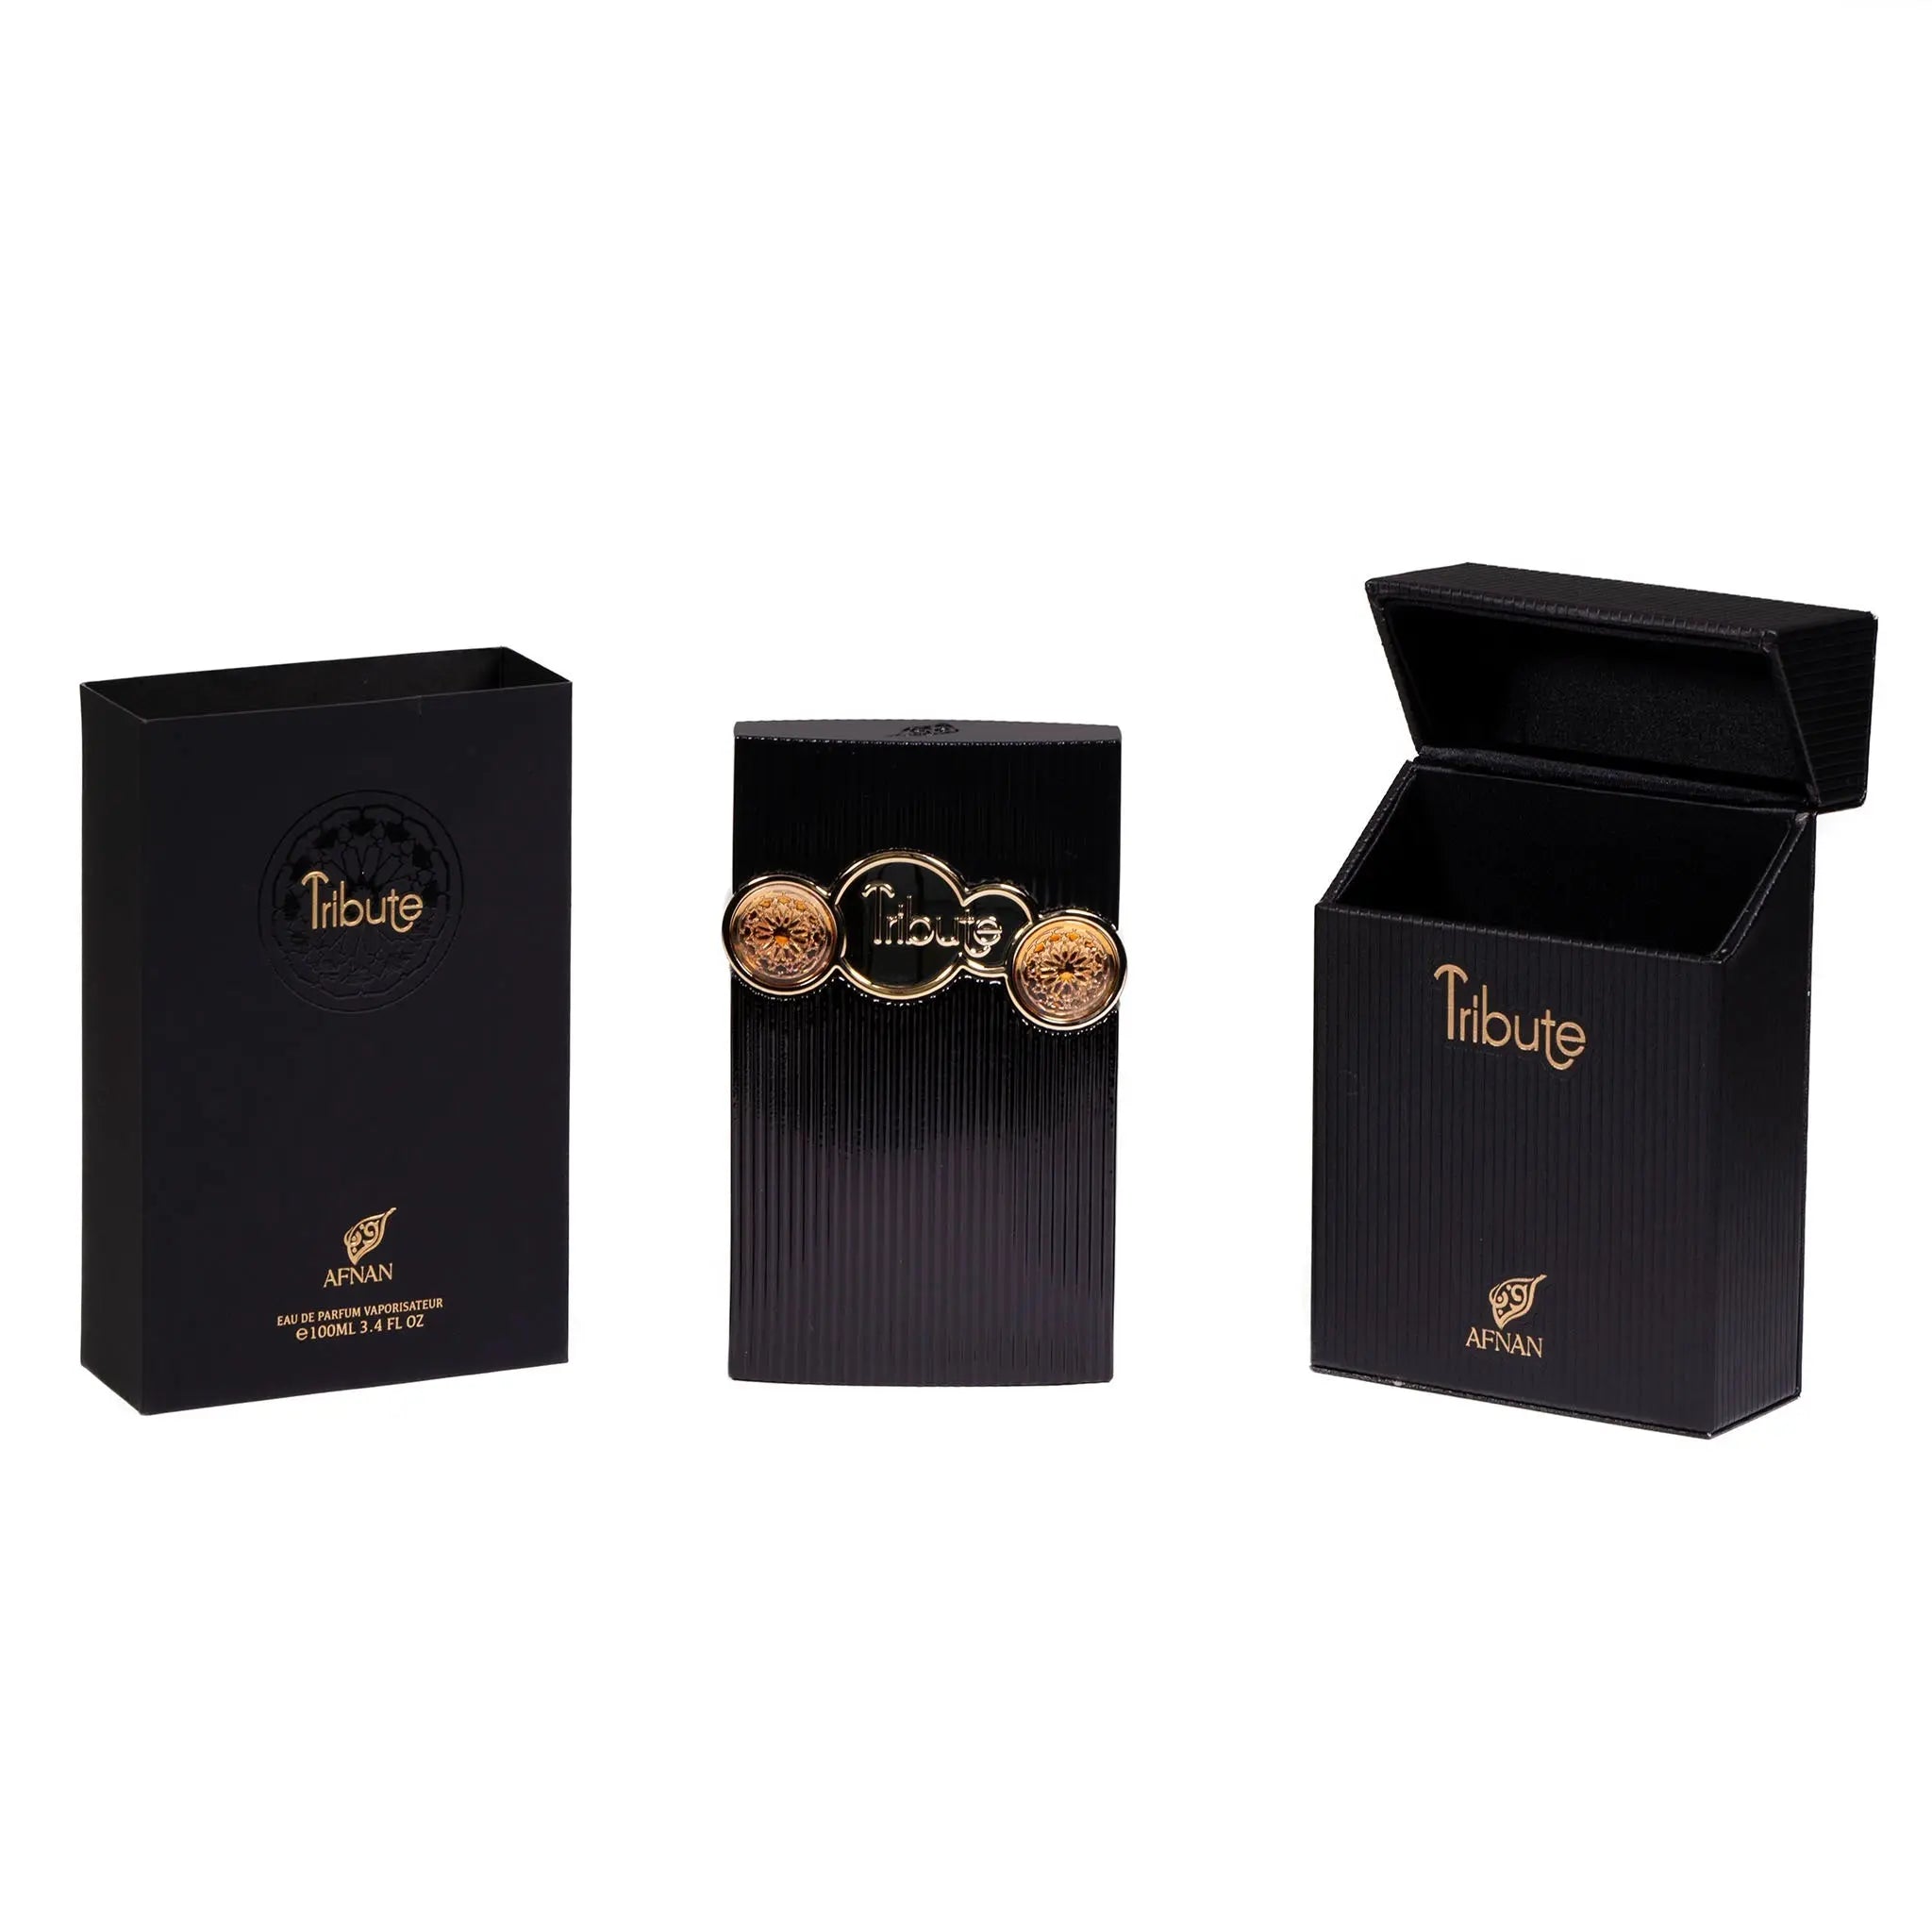 The image features a three-piece set from the perfume brand "AFNAN". On the left is a sleek black packaging box with a gold embossed circular emblem that reads "Tribute" and the AFNAN logo beneath it. In the middle stands the perfume bottle, which has a ribbed black surface and is adorned with three ornate gold seals.  To the right, there is another black box, this one open to display the interior, with "Tribute" and the AFNAN logo again in gold lettering.